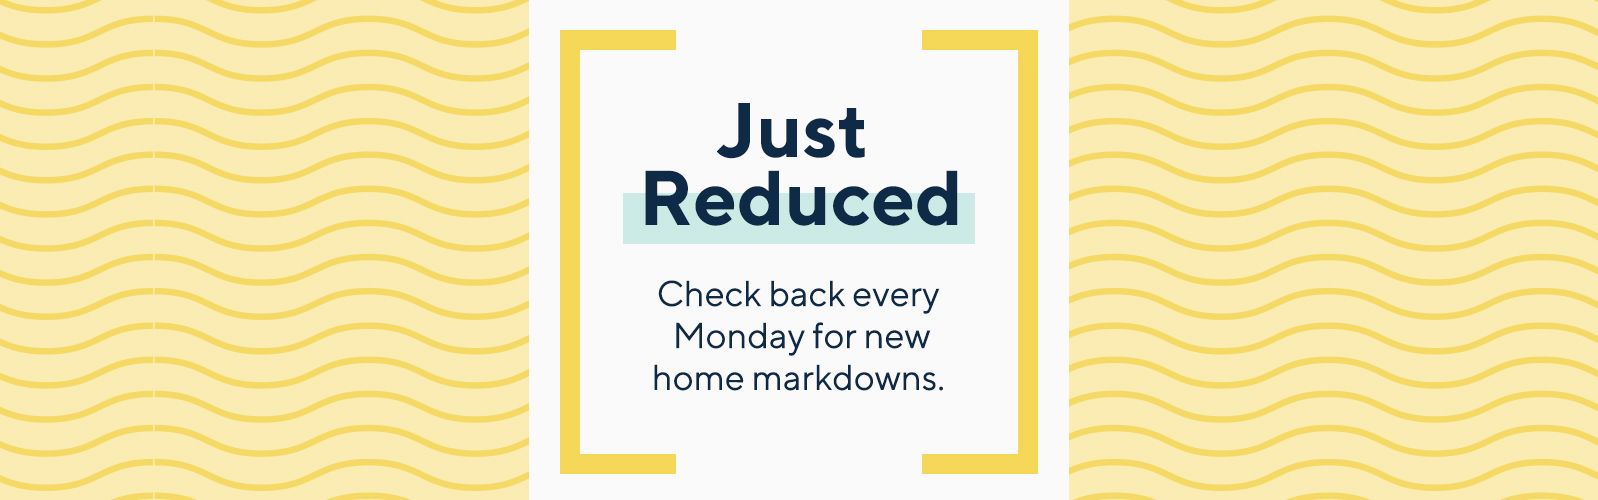 Just Reduced  Check back every Monday for new home markdowns. 